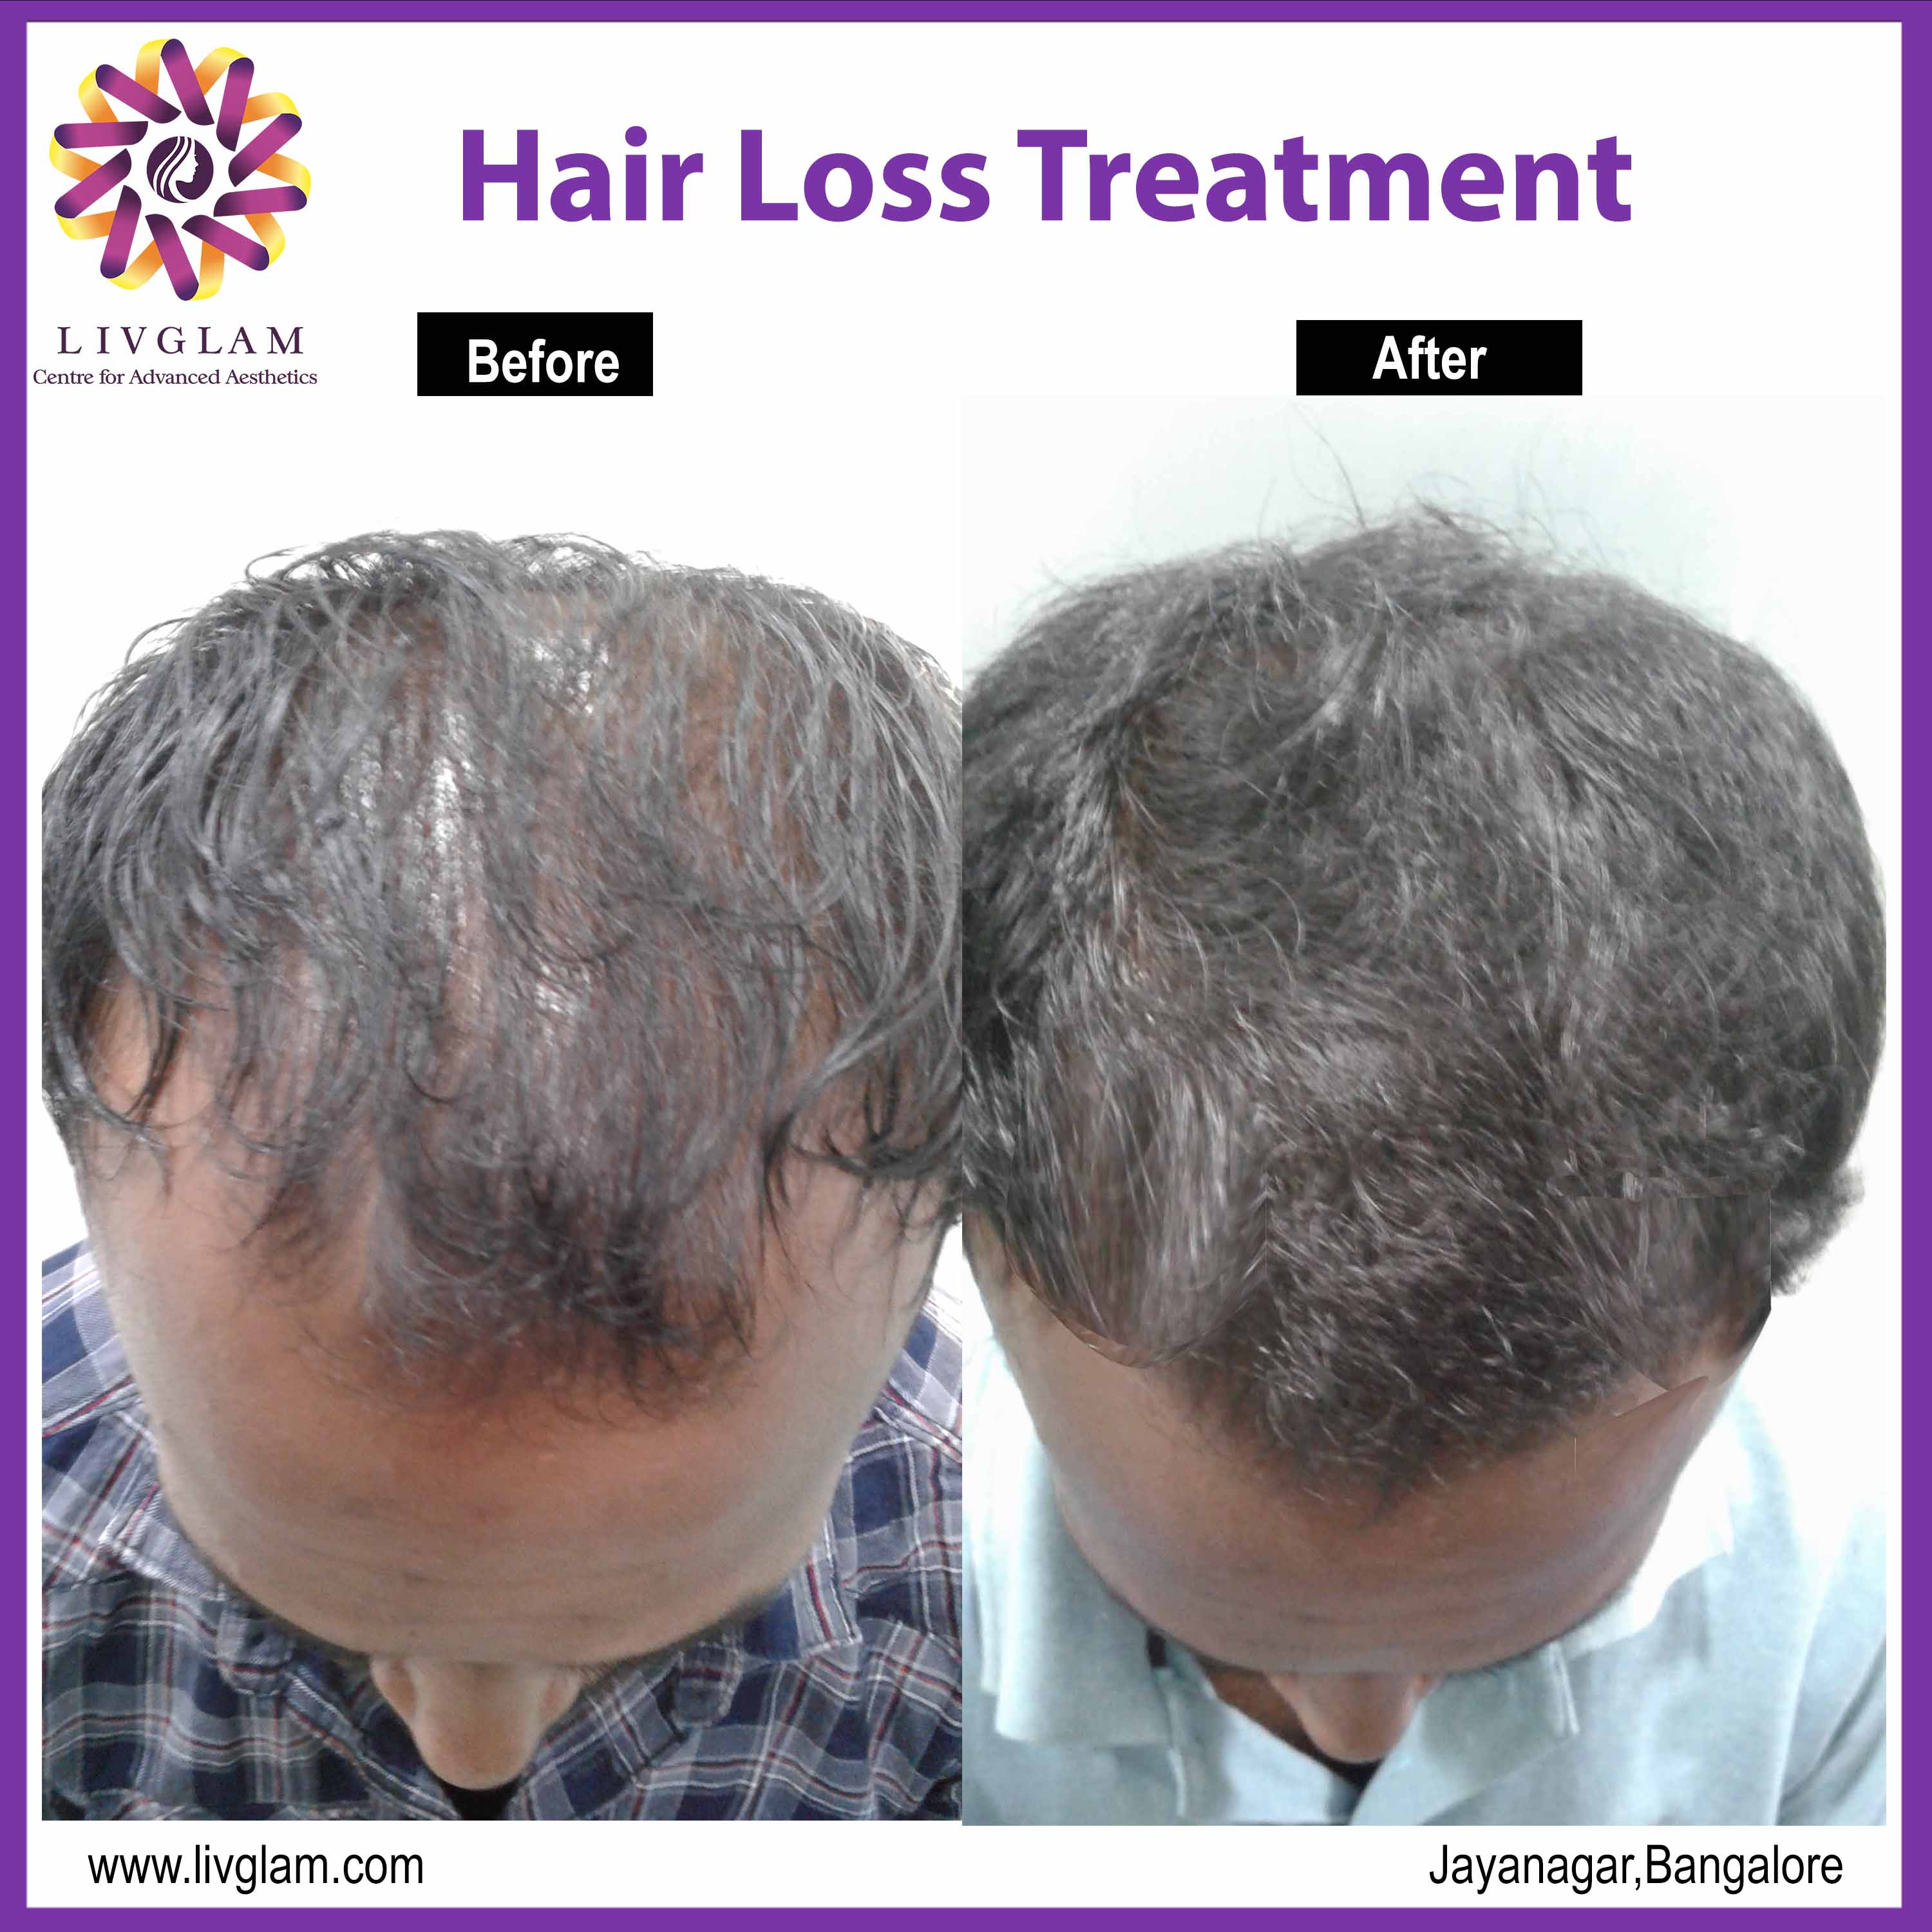 Cost of hair loss treatment in Bangalore